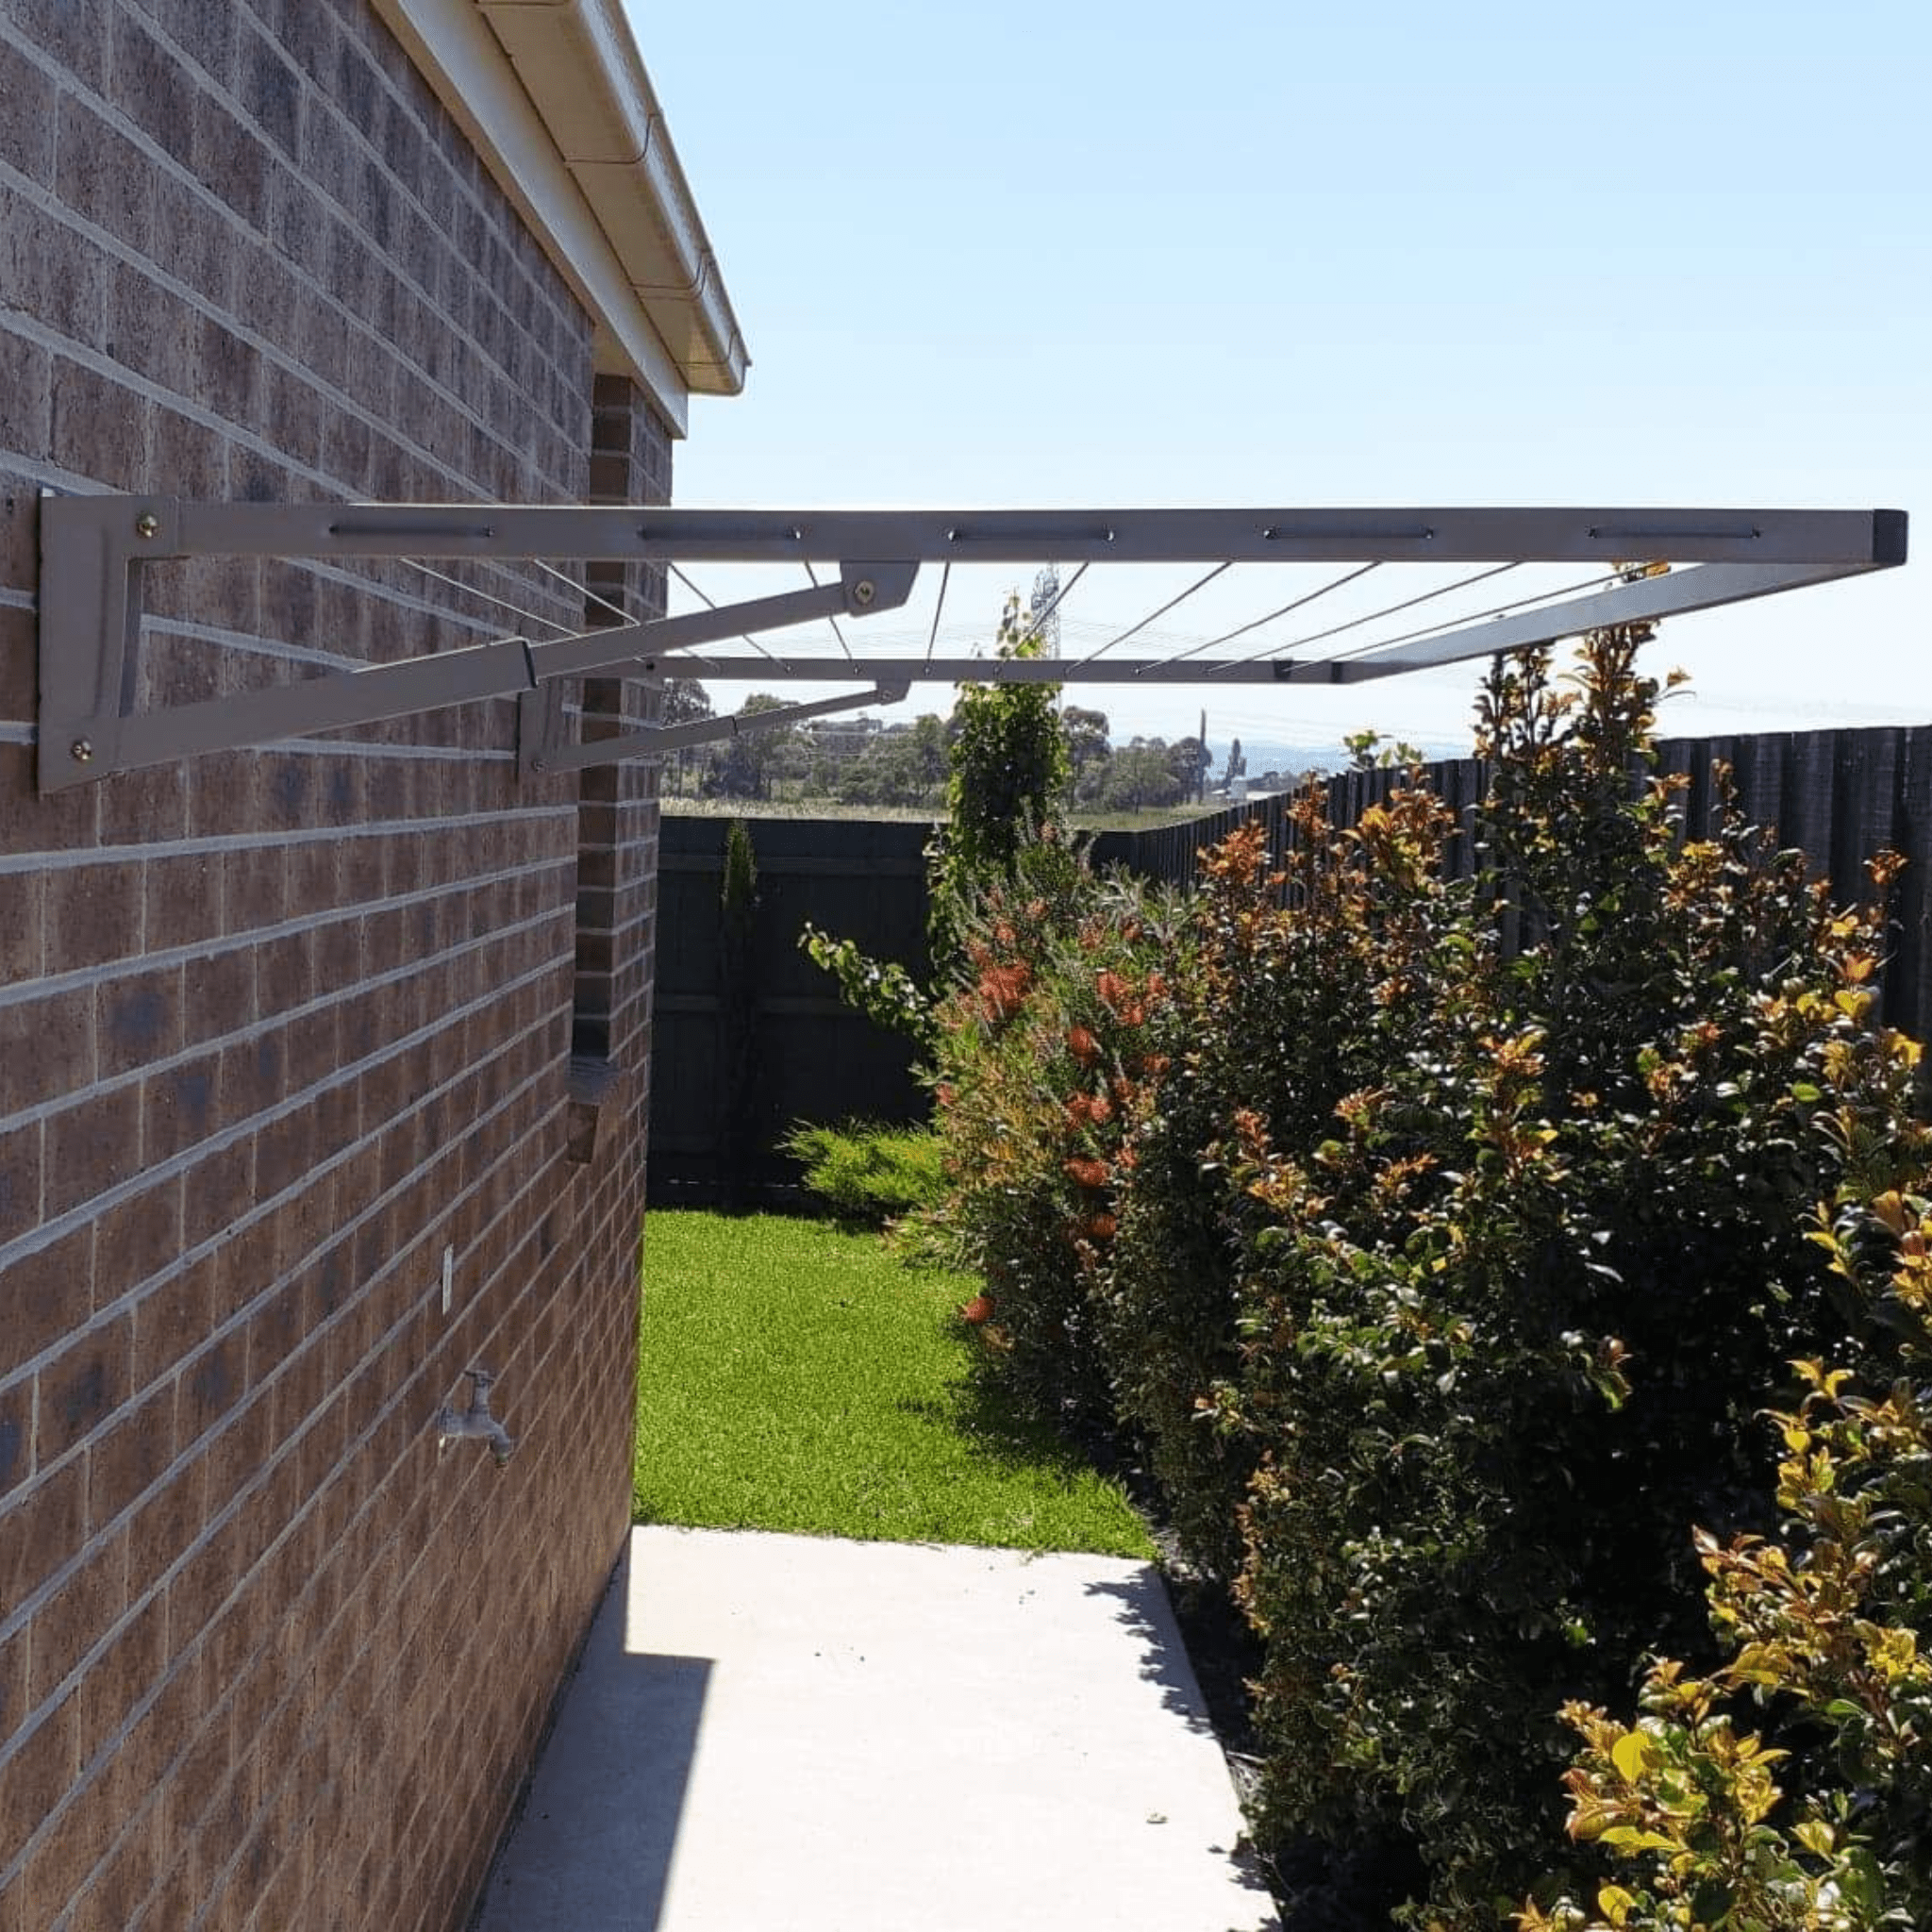 wall mounted clothesline installation in Caulfield, Melbourne.